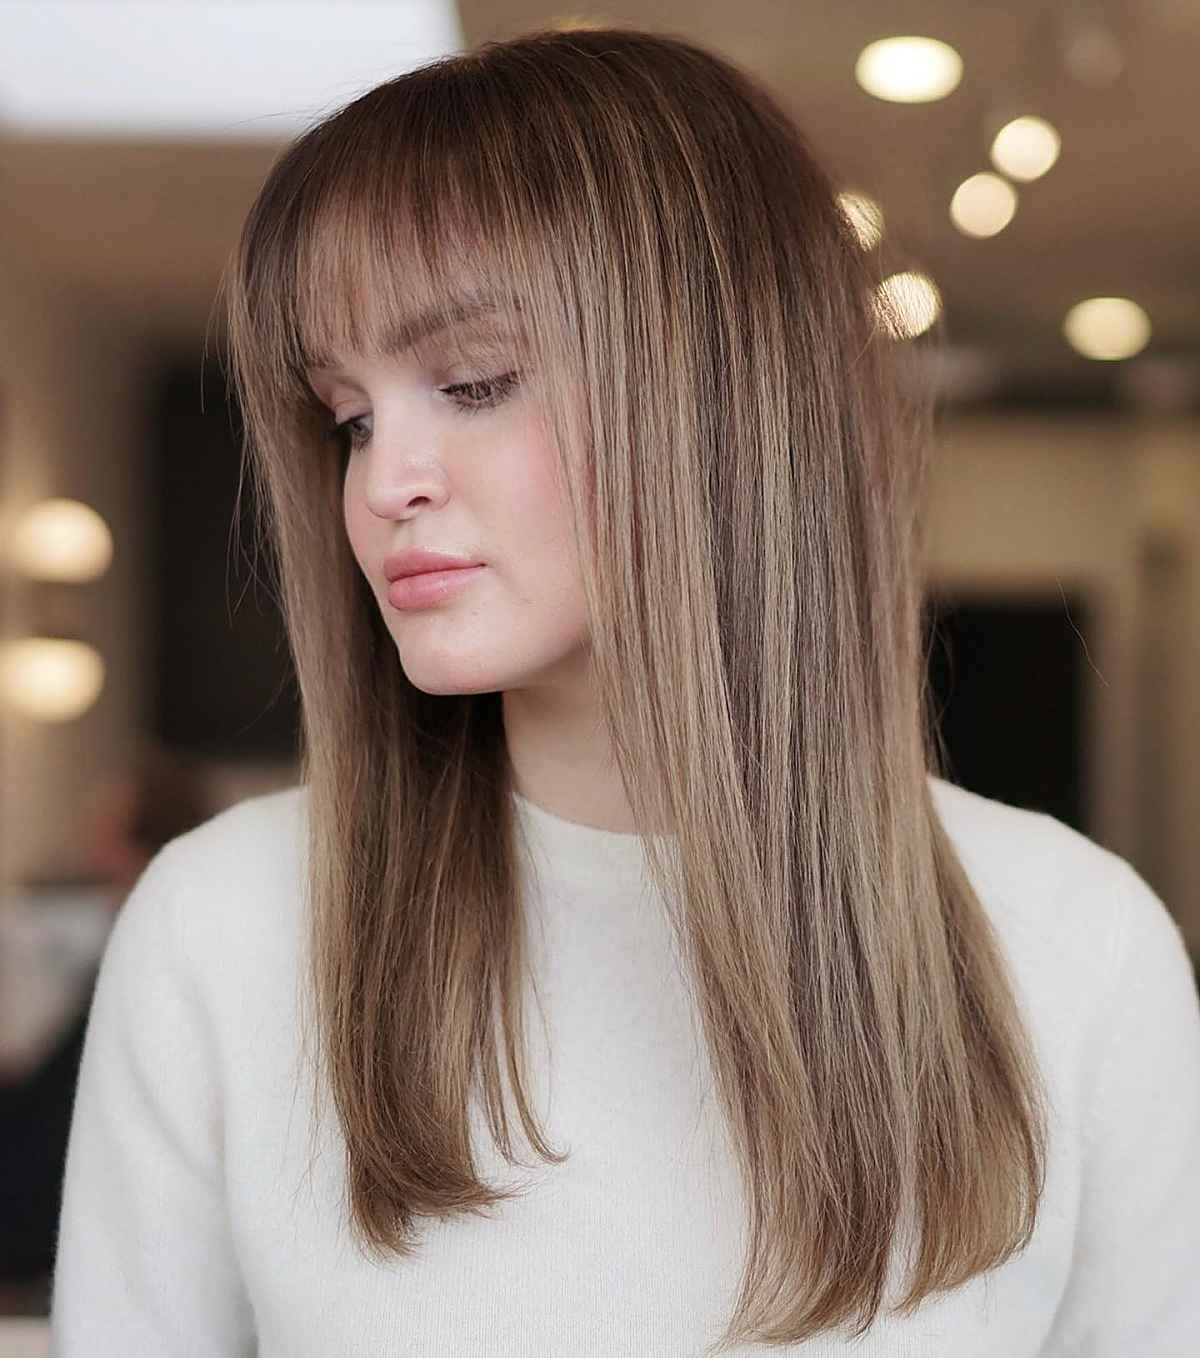 30 Gorgeous Ash Brown Hair Colors - The Trend You Need to Try